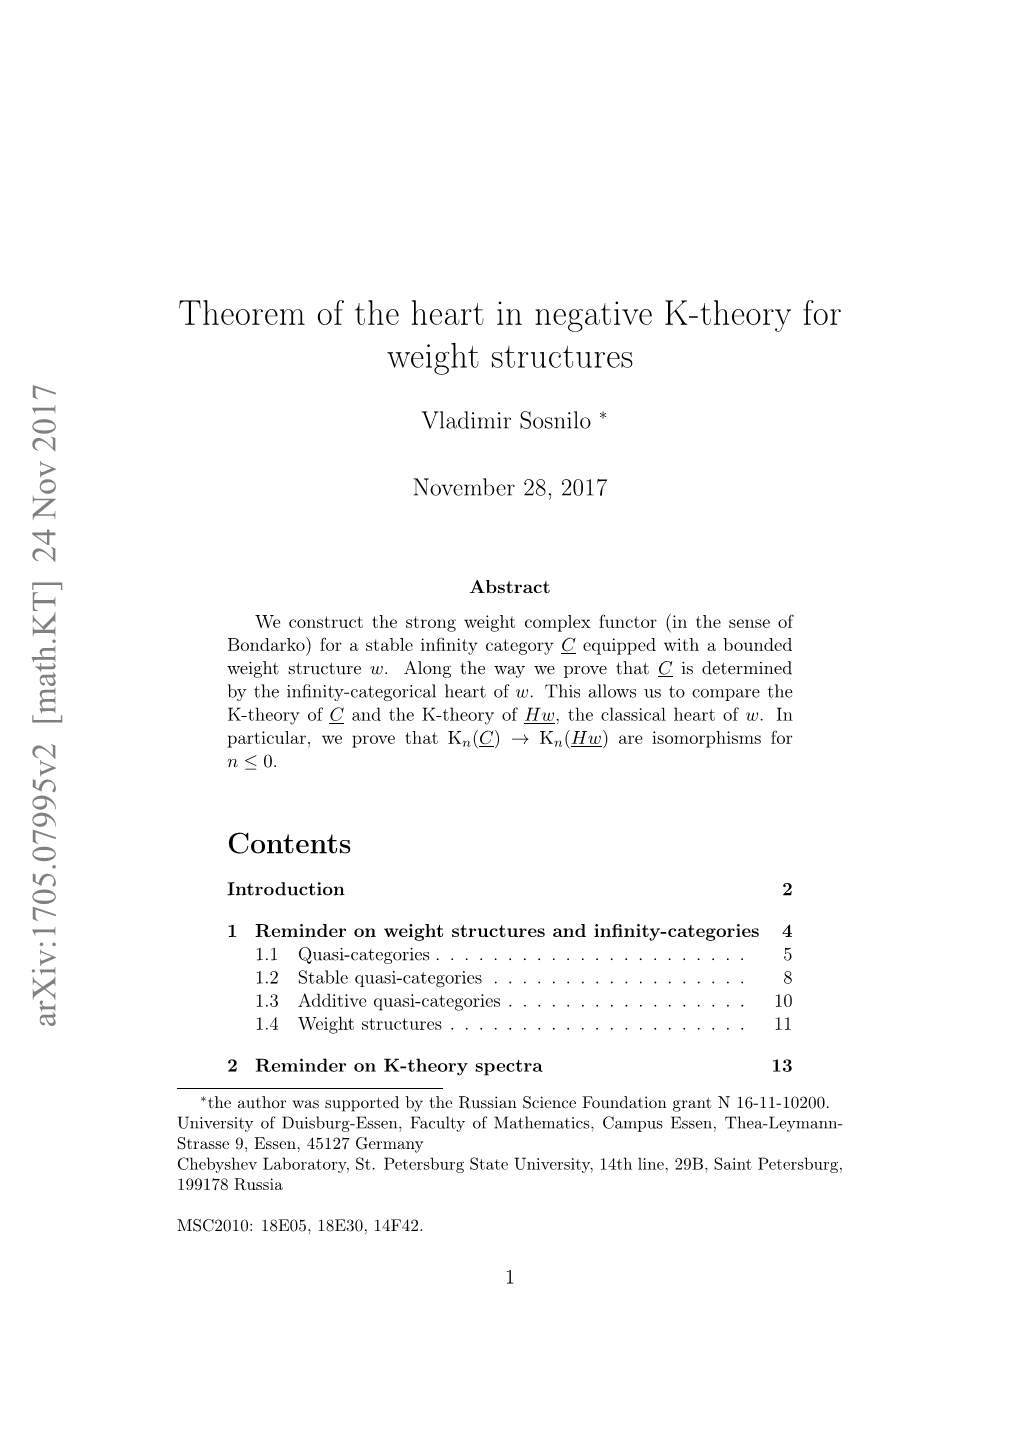 Theorem of the Heart in Negative K-Theory for Weight Structures